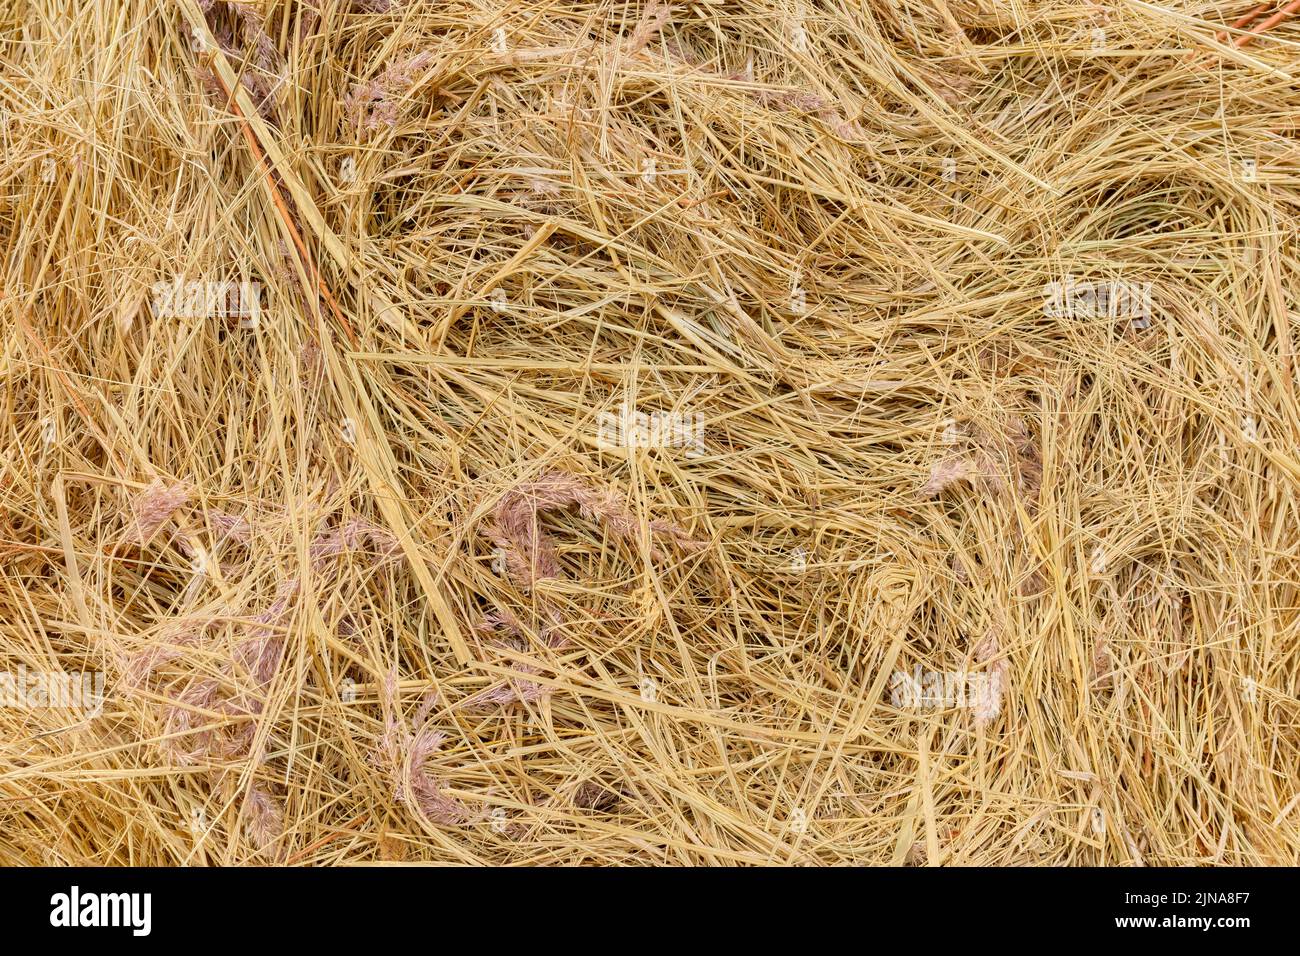 Close up picture of a hay bale, abstract natural background. Stock Photo